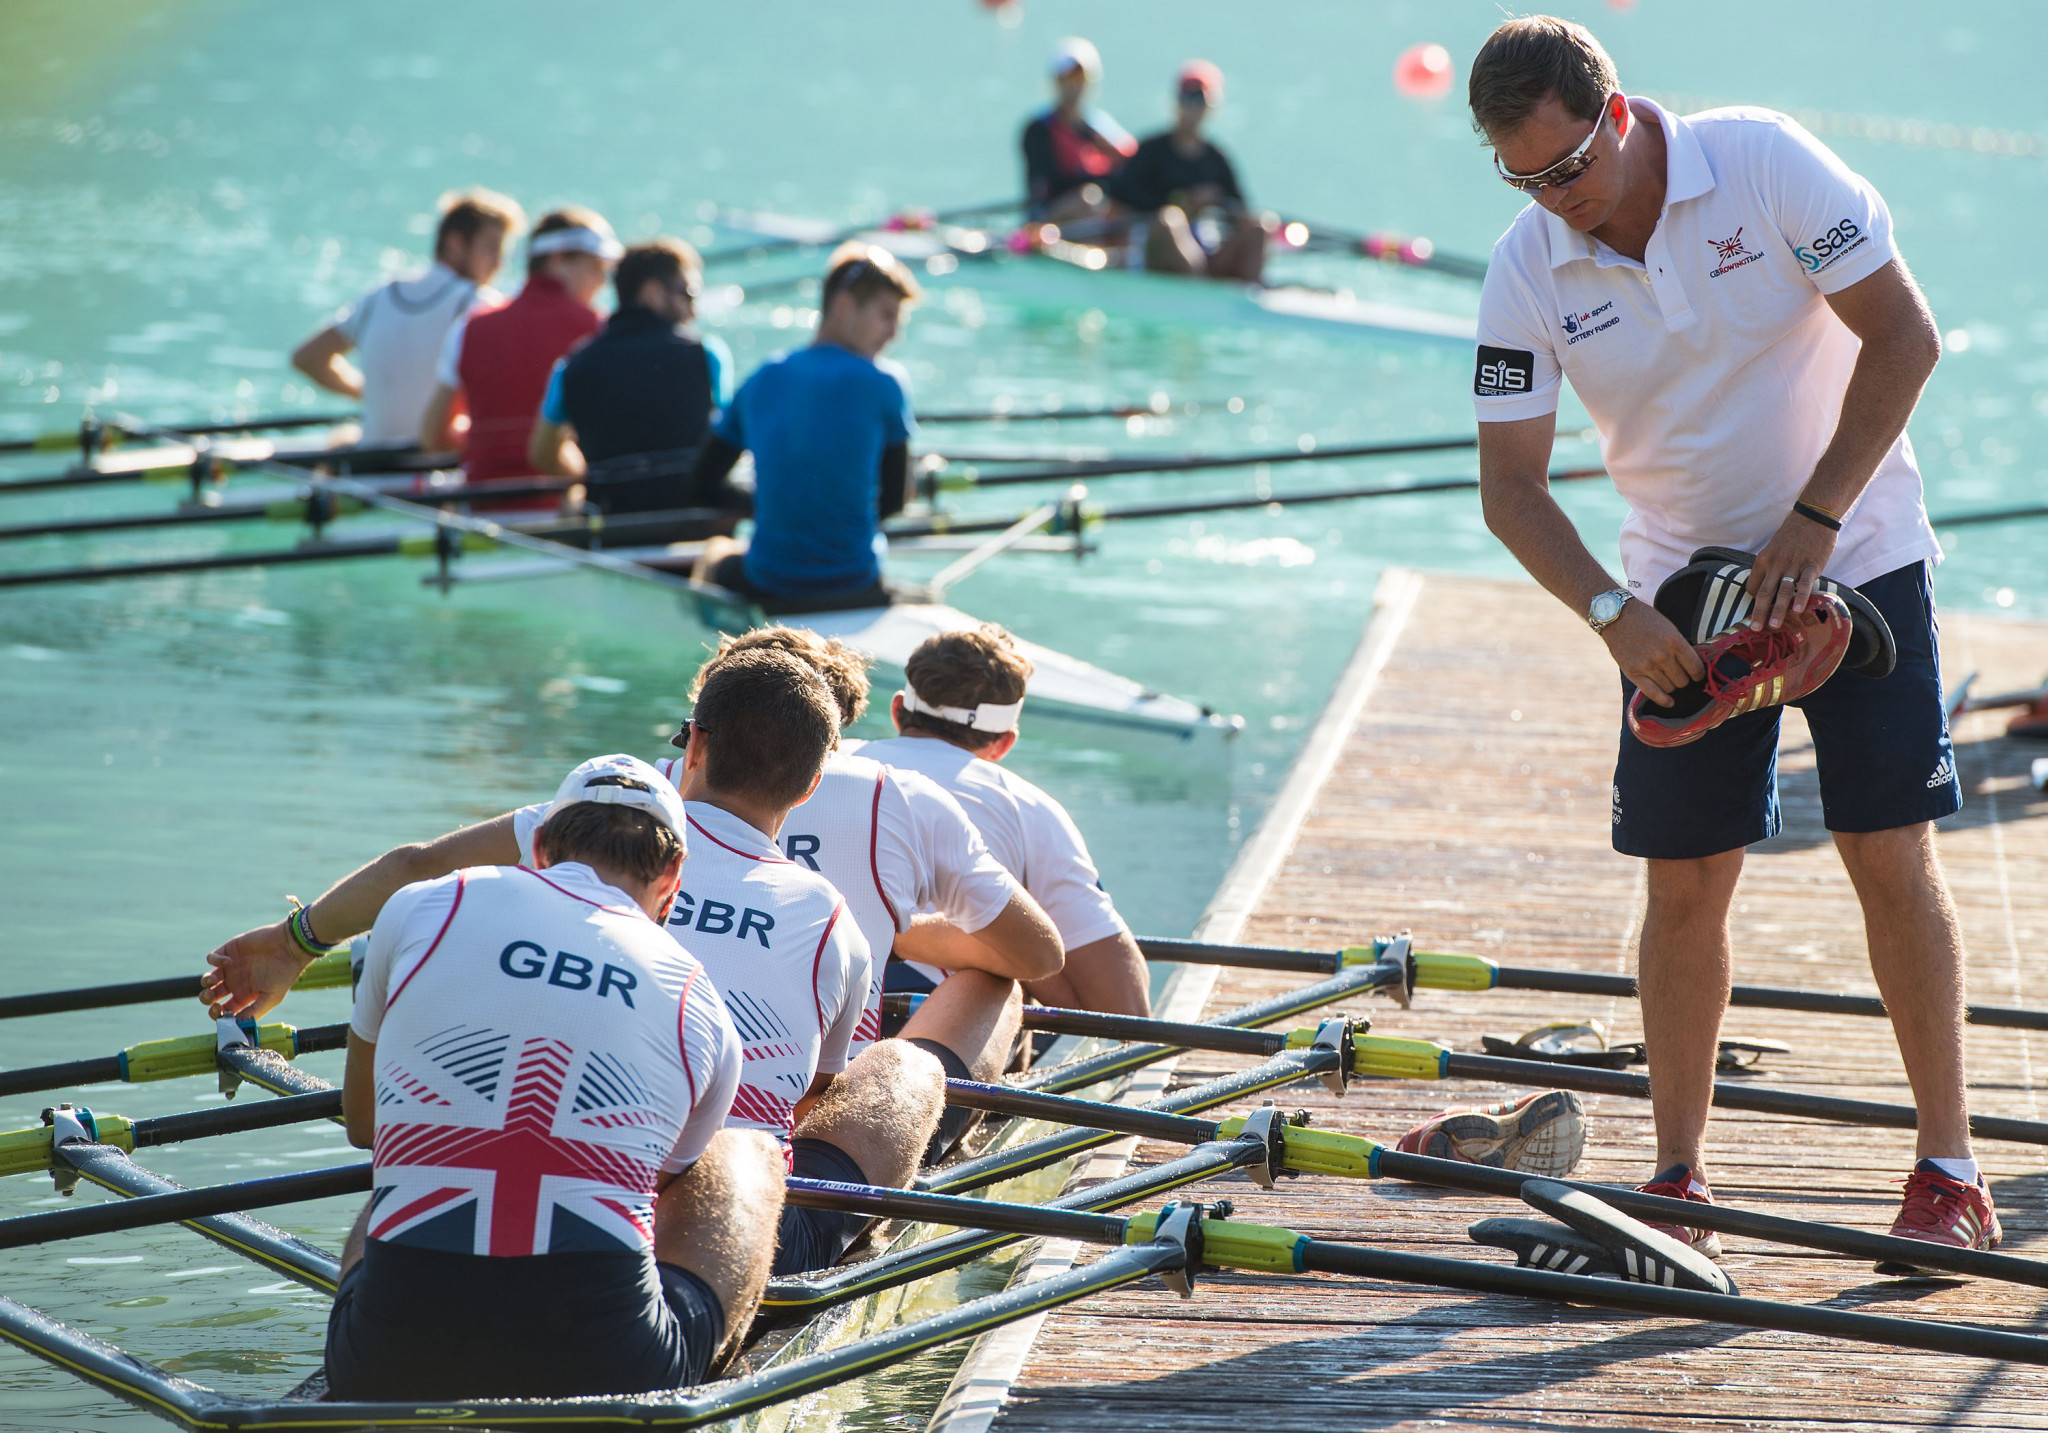 Paul Stannard will be responsible for leading men's sculling under British Rowing's new coaching structure ©Getty Images